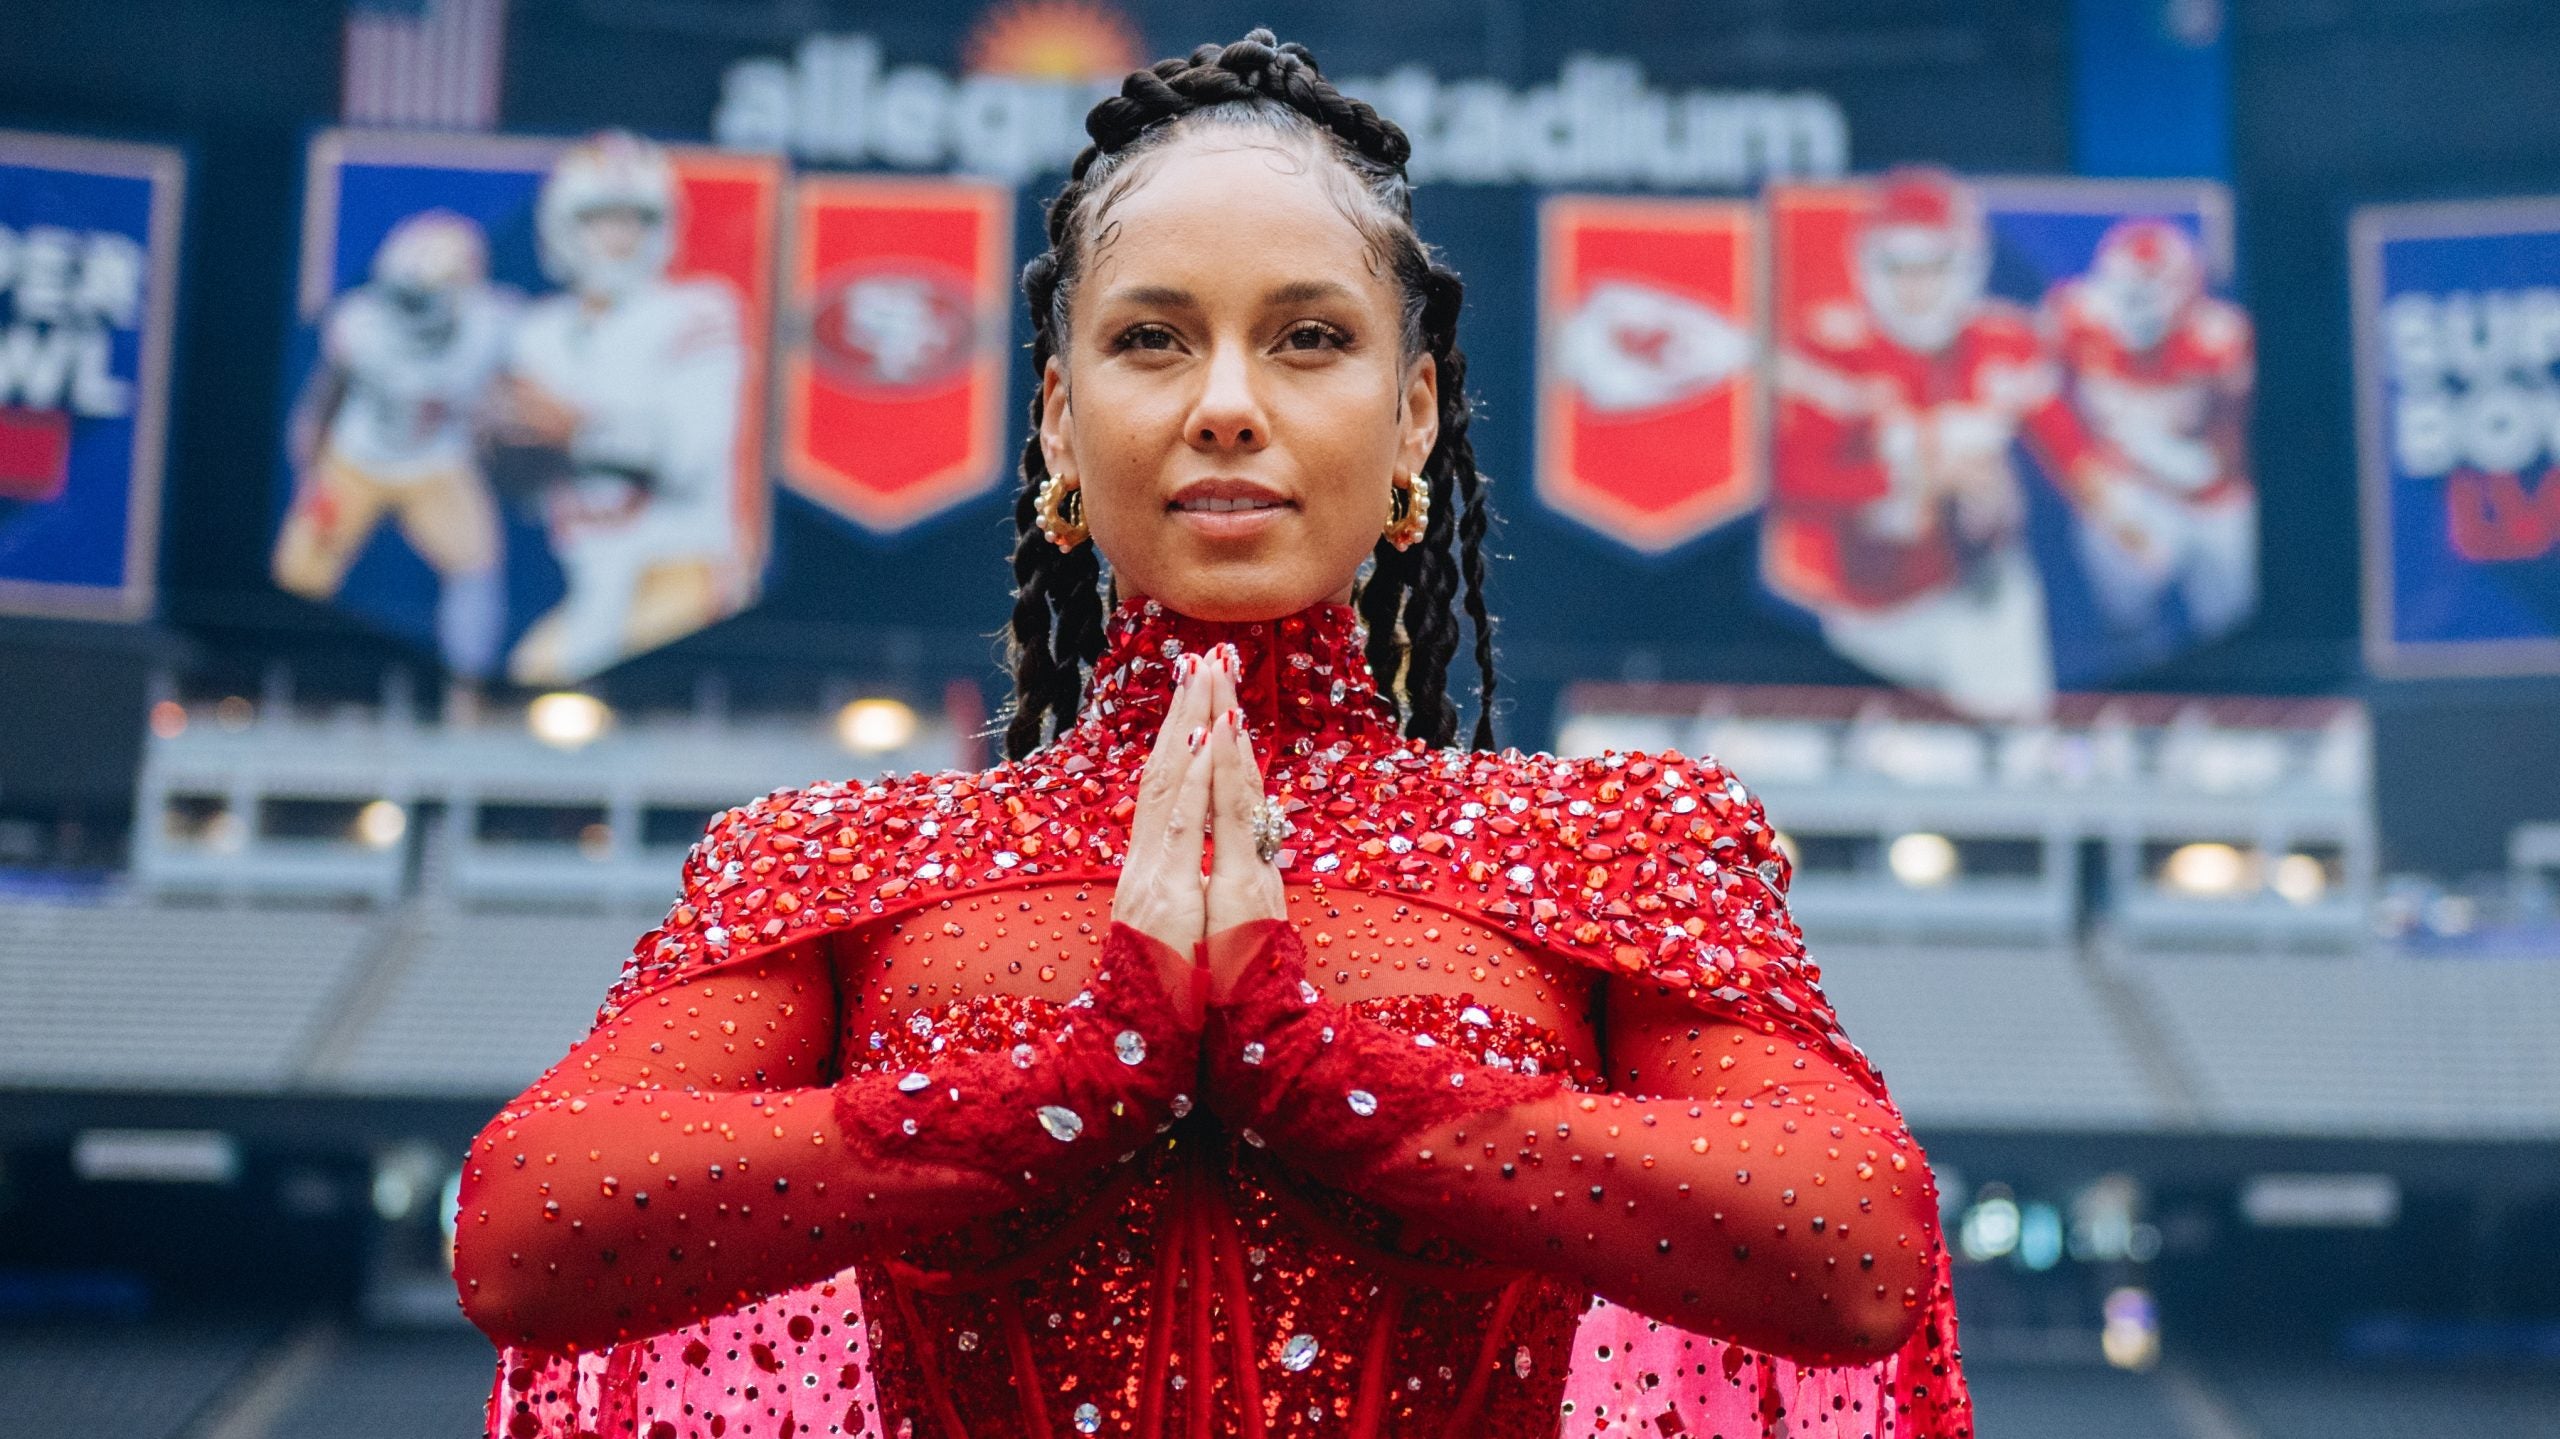 Alicia Keys Glows During the Sunday Super Bowl Half-Time Show